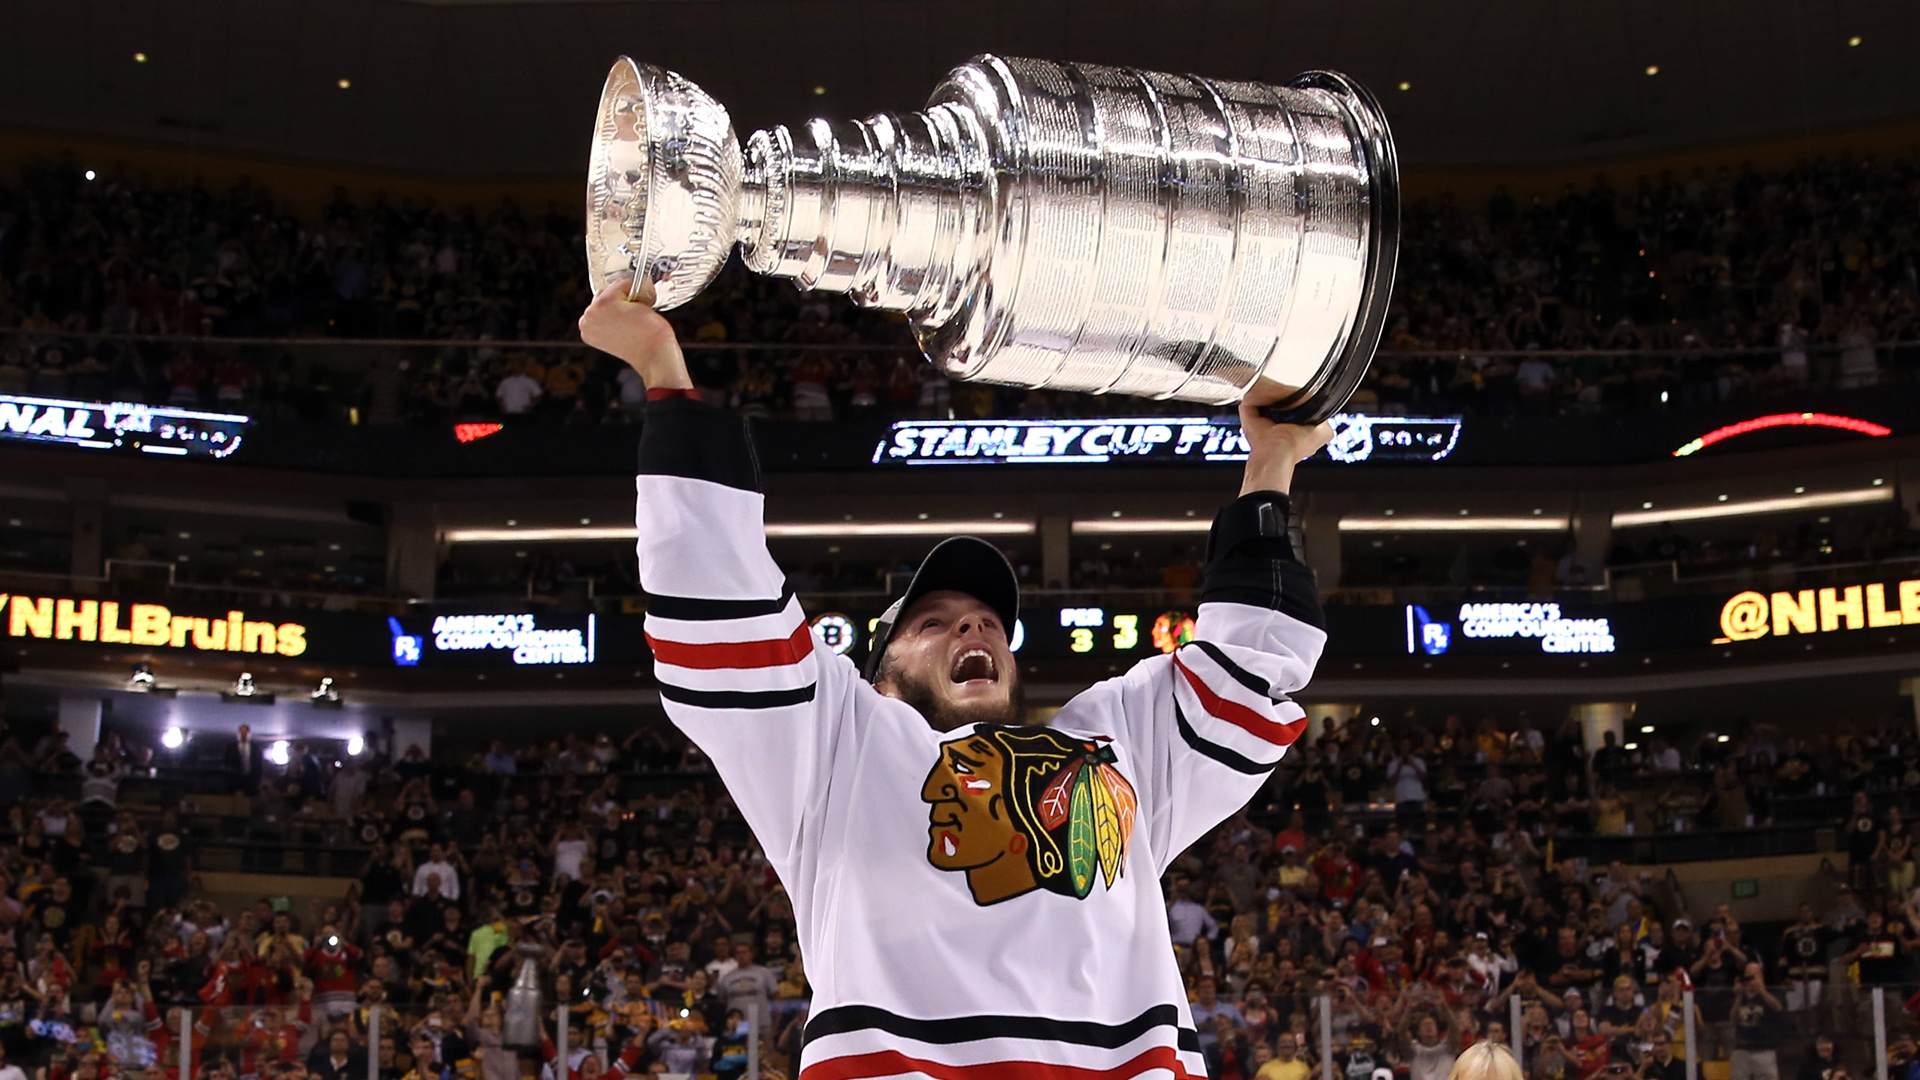 Blackhawks crowned 2015 Stanley Cup champions